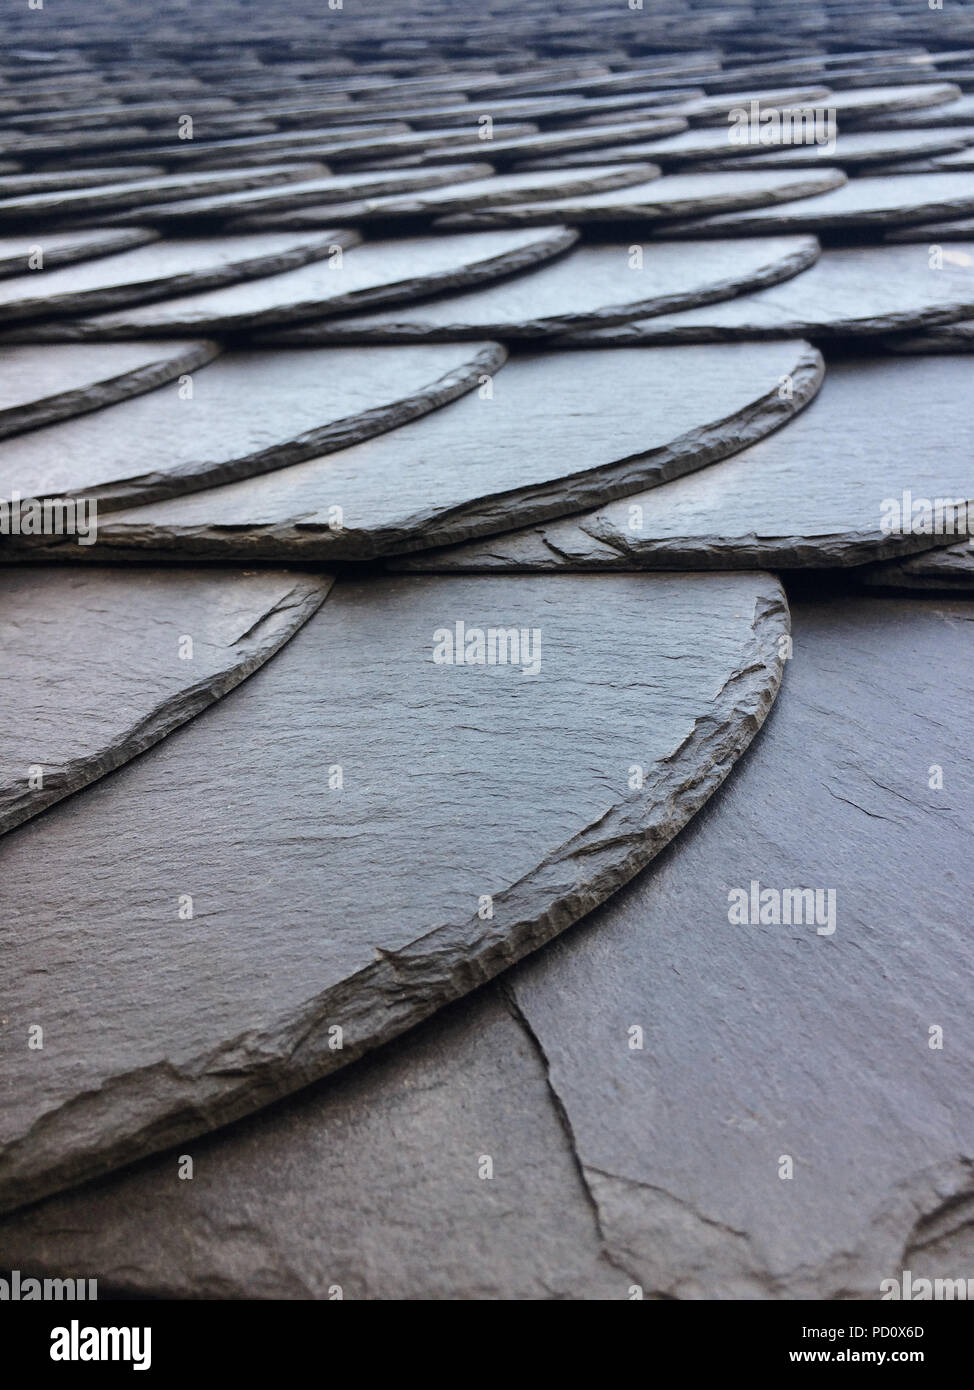 Details of black shale tiles on a house Stock Photo